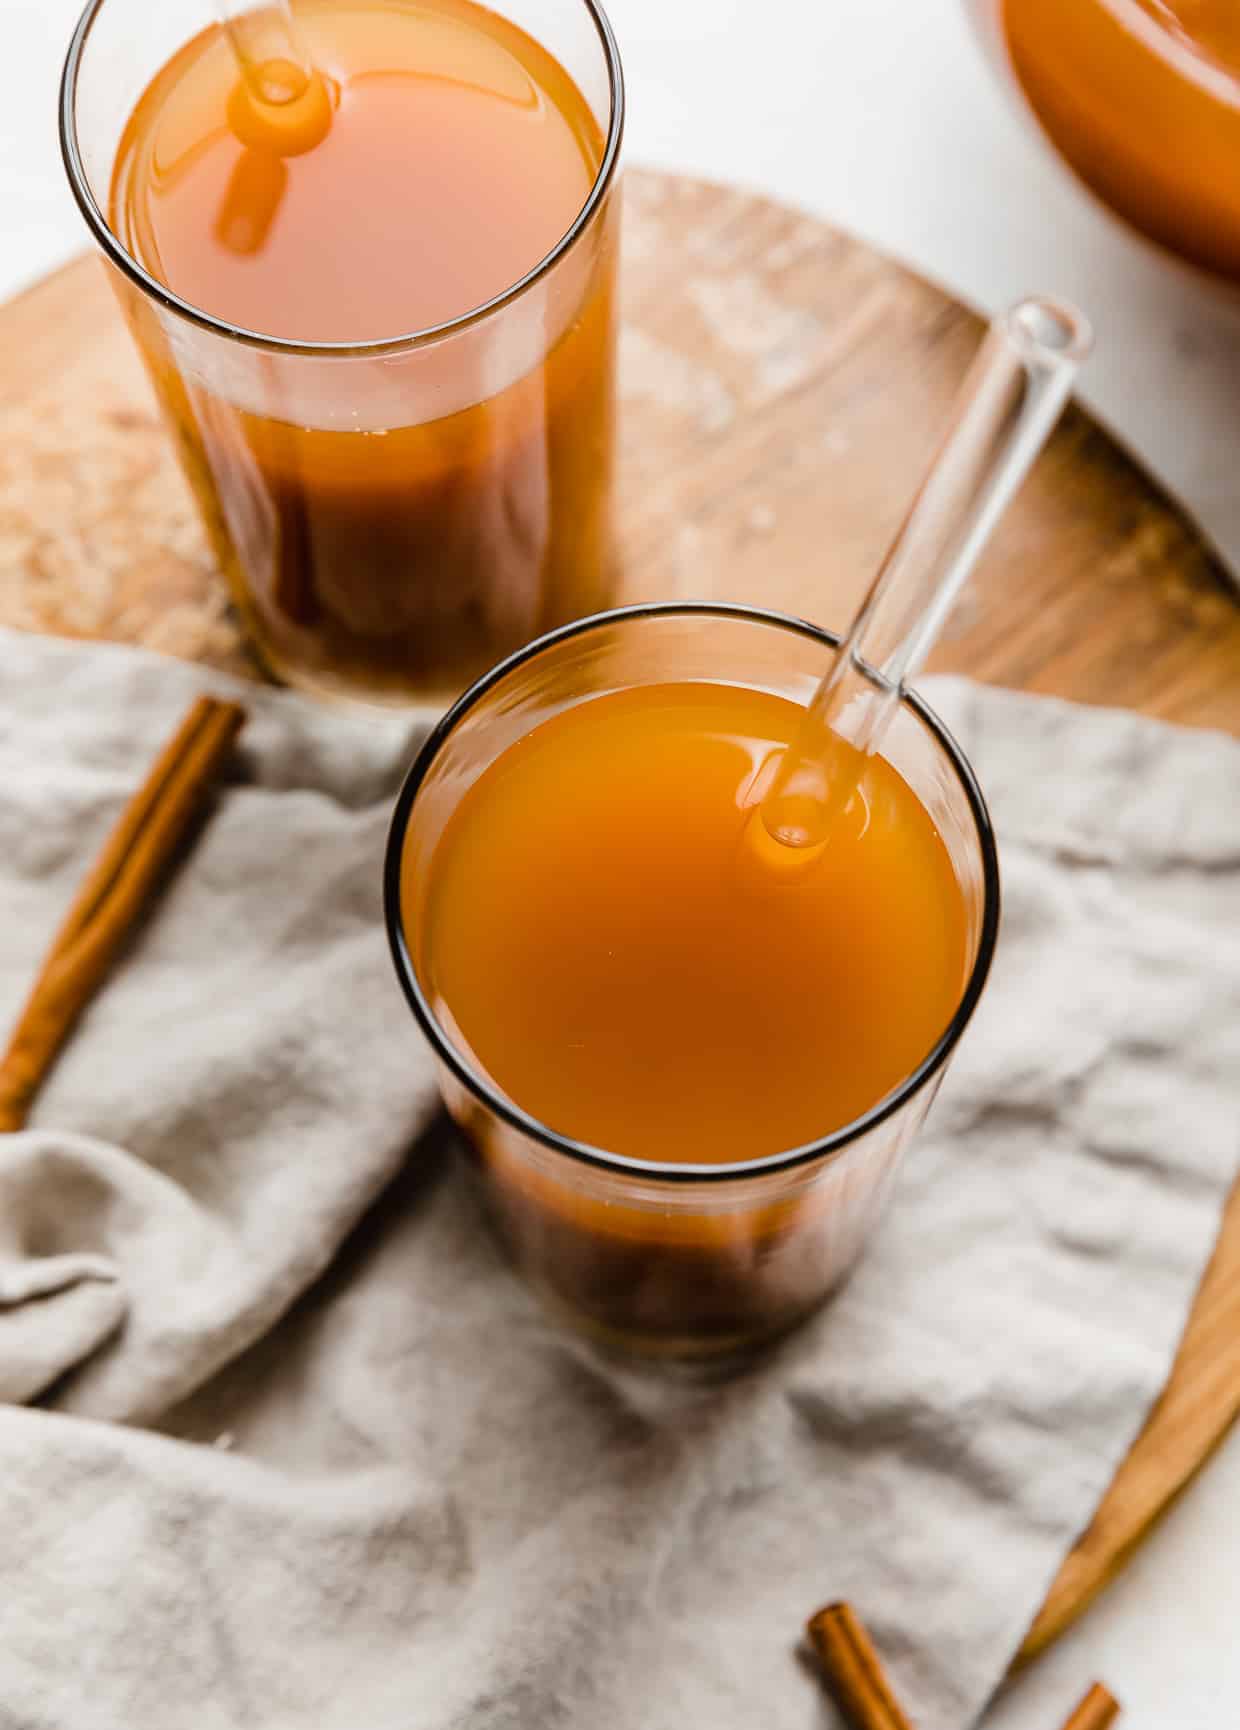 Overhead photo of Pumpkin Juice in a glass cup with a glass straw in the drink.